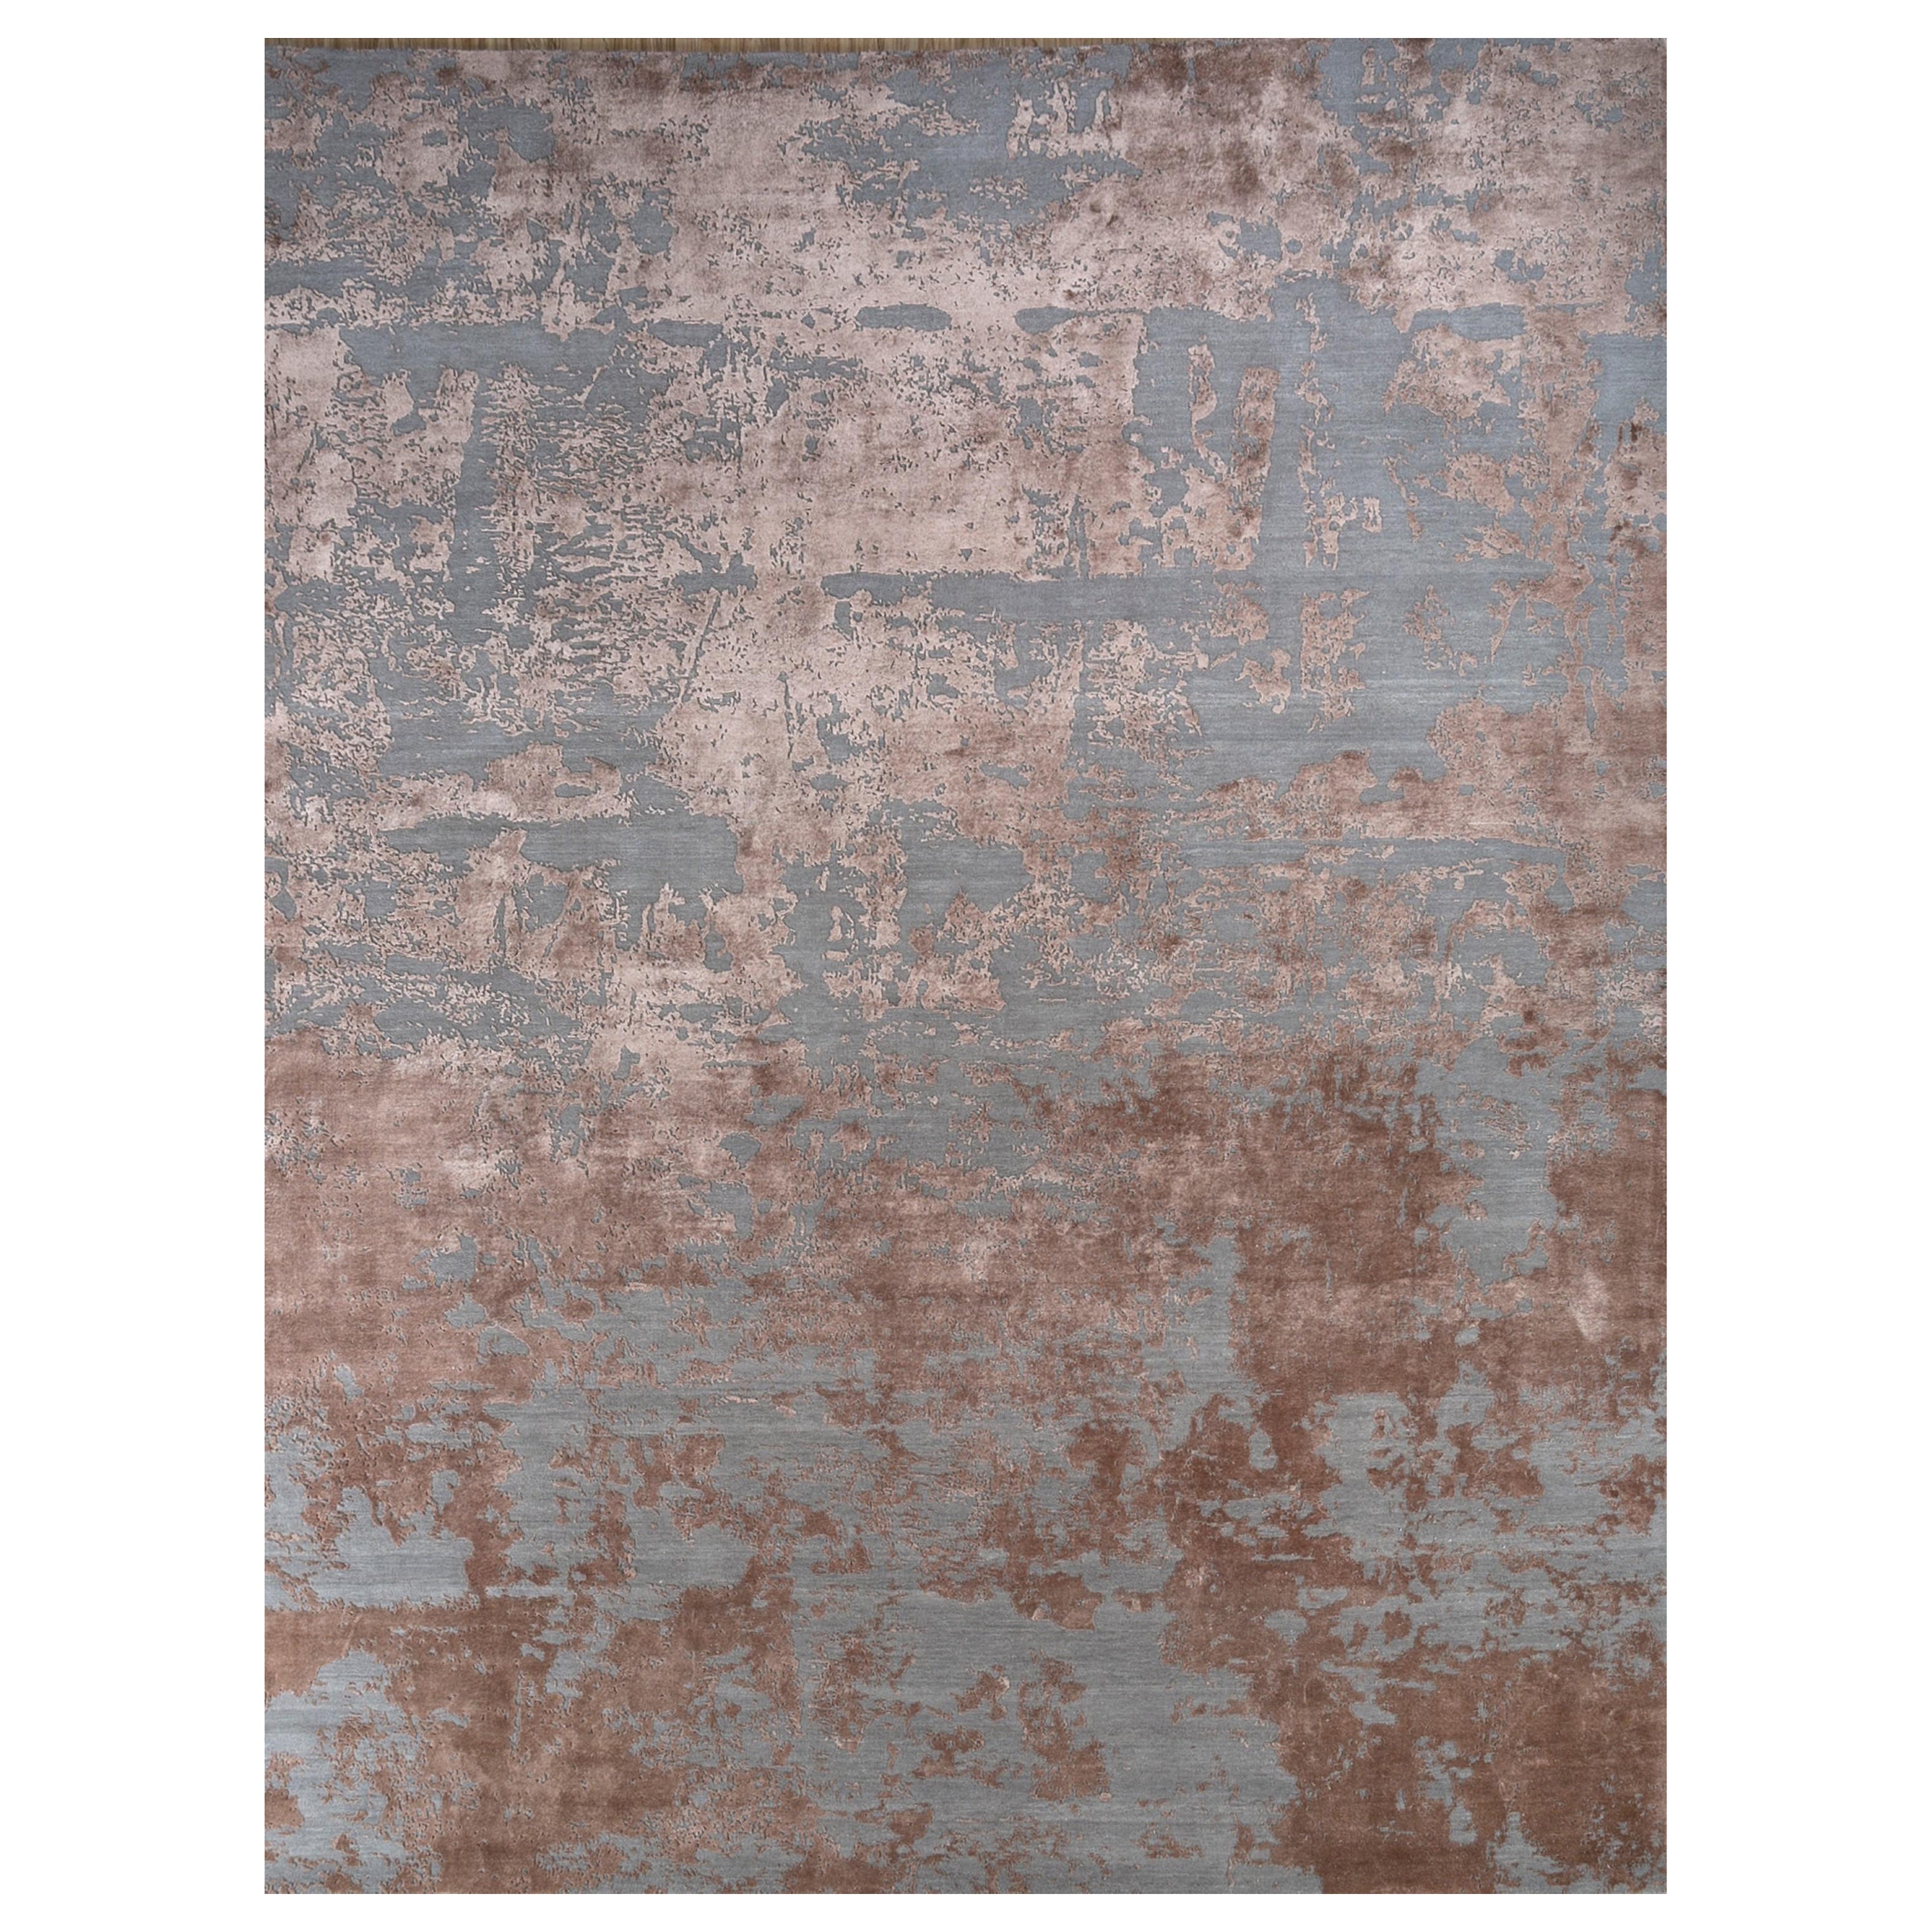 Nature's Rebellion Ashwood & Natural Brown 170x240 cm Handknotted Rug